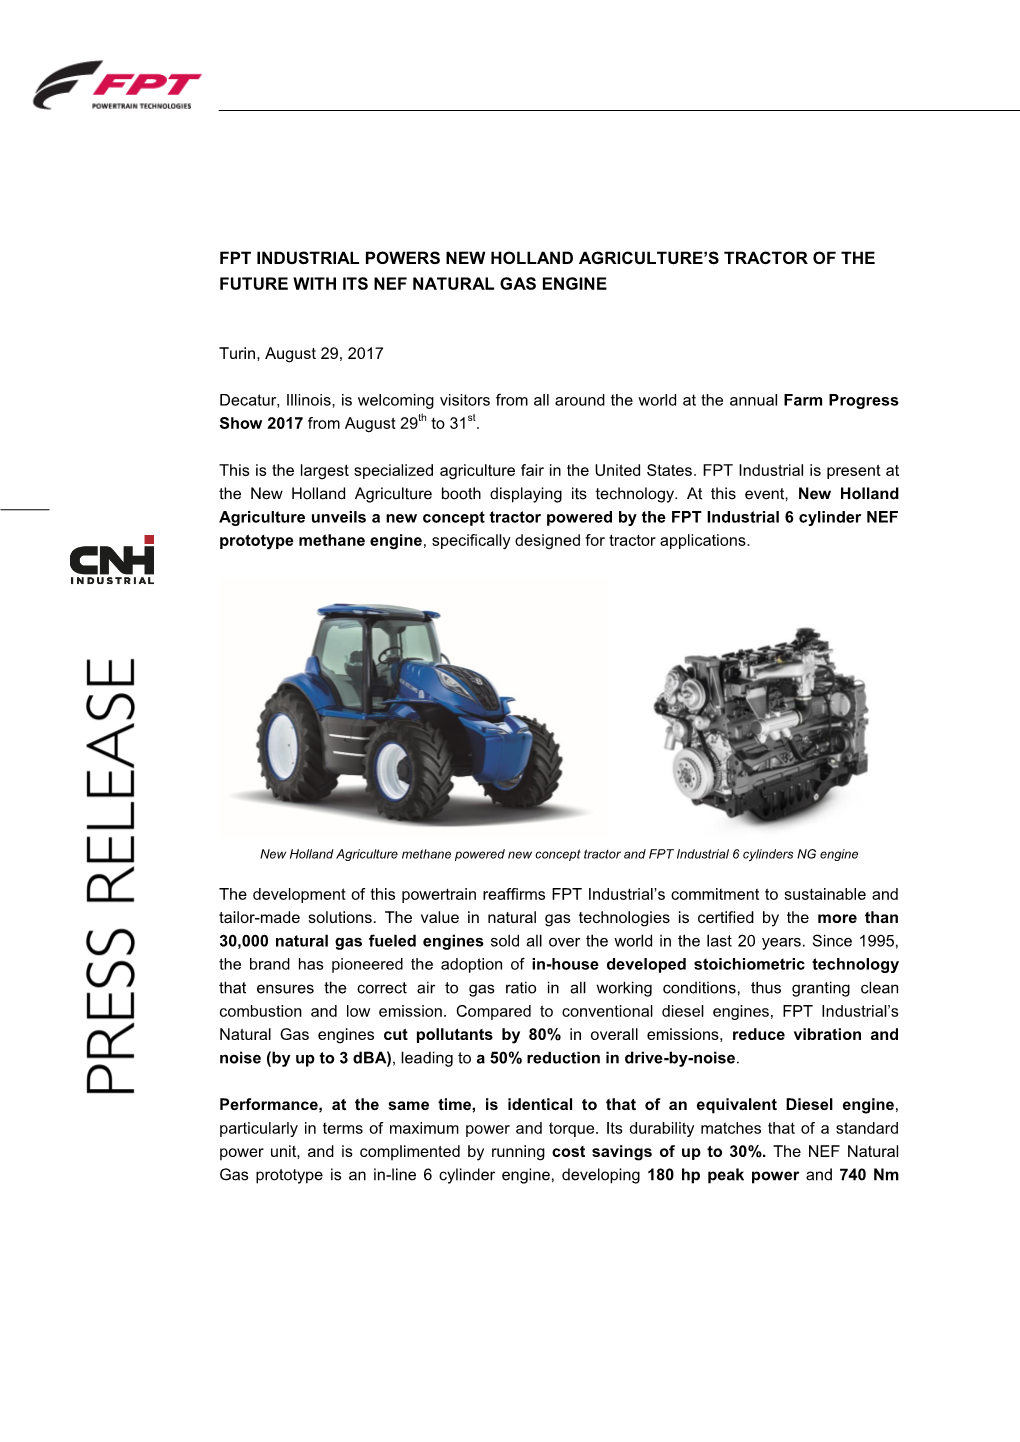 CNH Industrial, Dedicated to the Design, Production and Sale of Powertrains for on and Off- Road Vehicles, Marine and Power Generation Applications